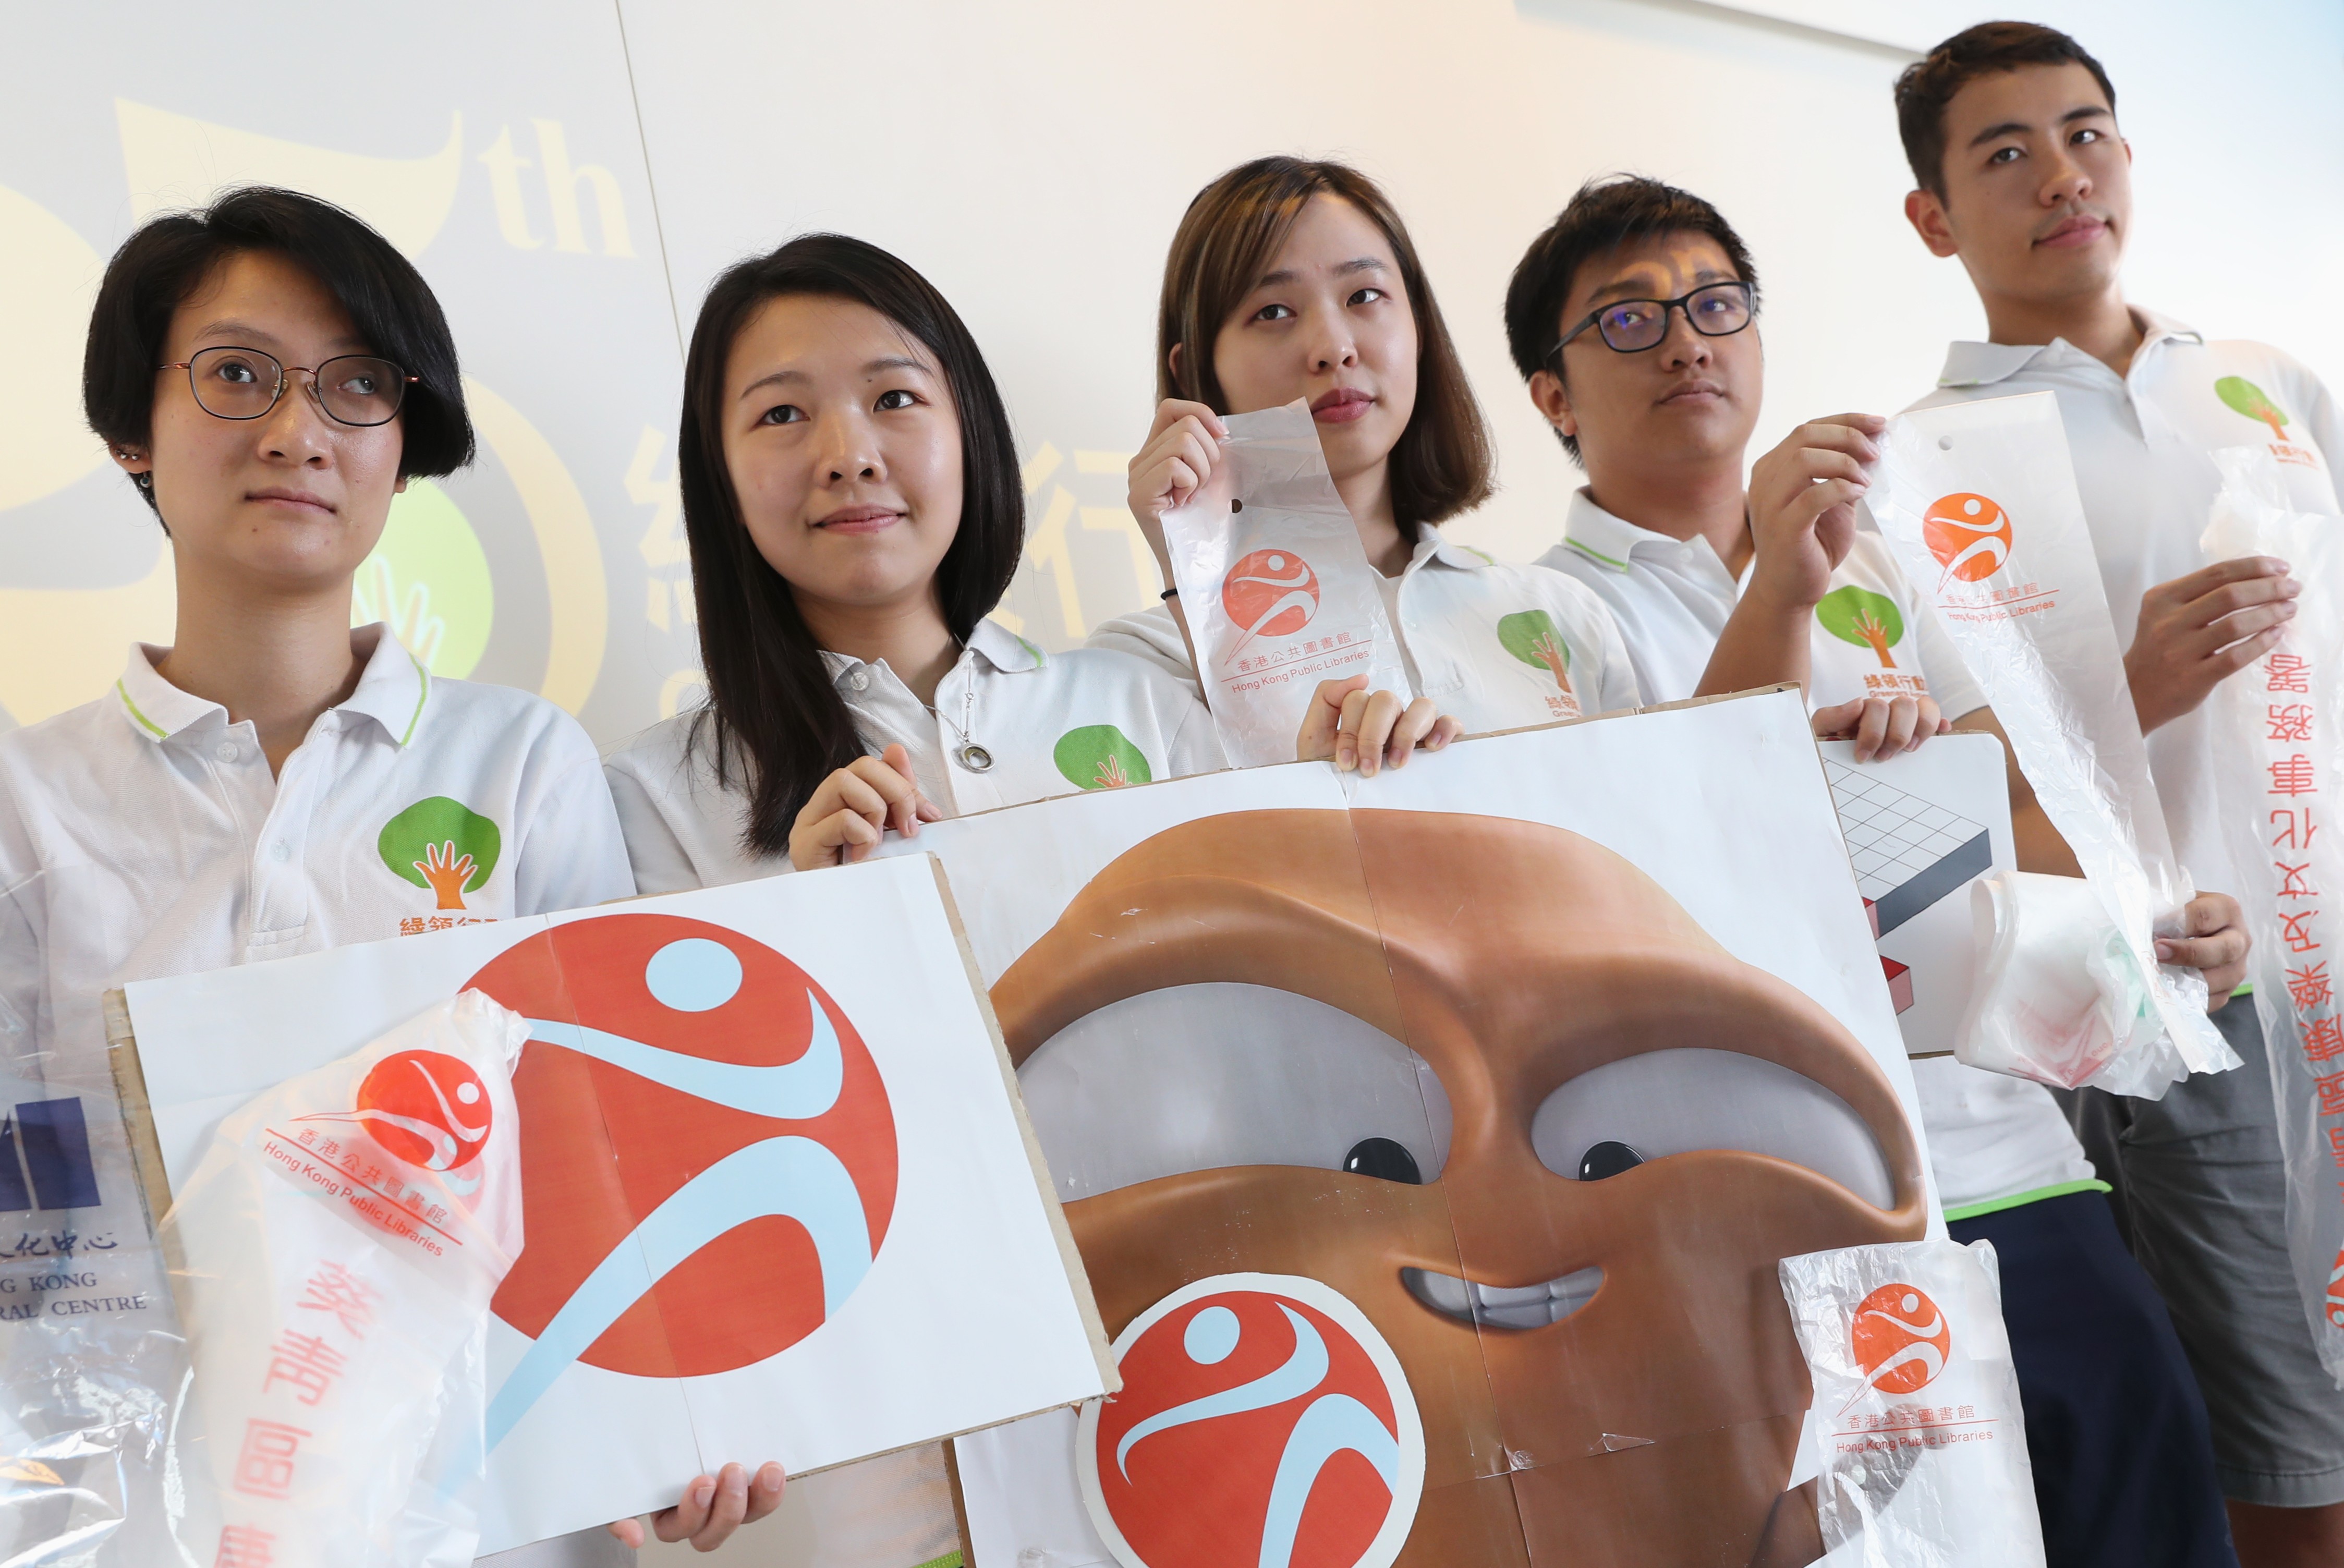 Greeners Action staff including Yip Chui-man (left) and Lo Tsz-kiu (second left) urging Hong Kong officials to cut down plastic bag waste. Photo: K. Y. Cheng